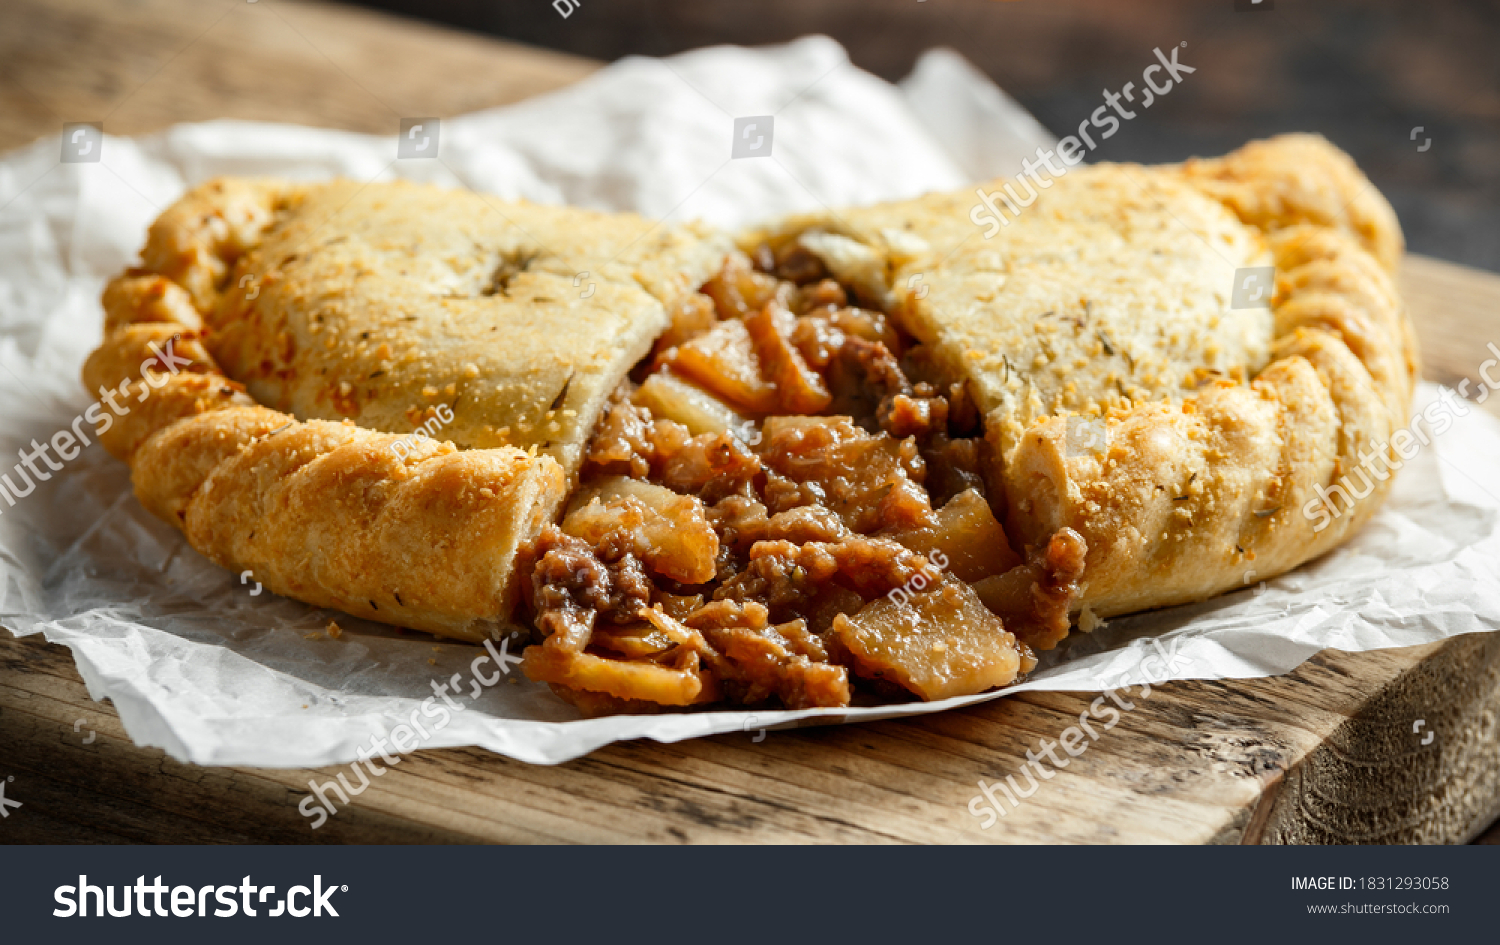 Traditional Cornish pasty filled with beef meat, potato and vegetables on black plate #1831293058